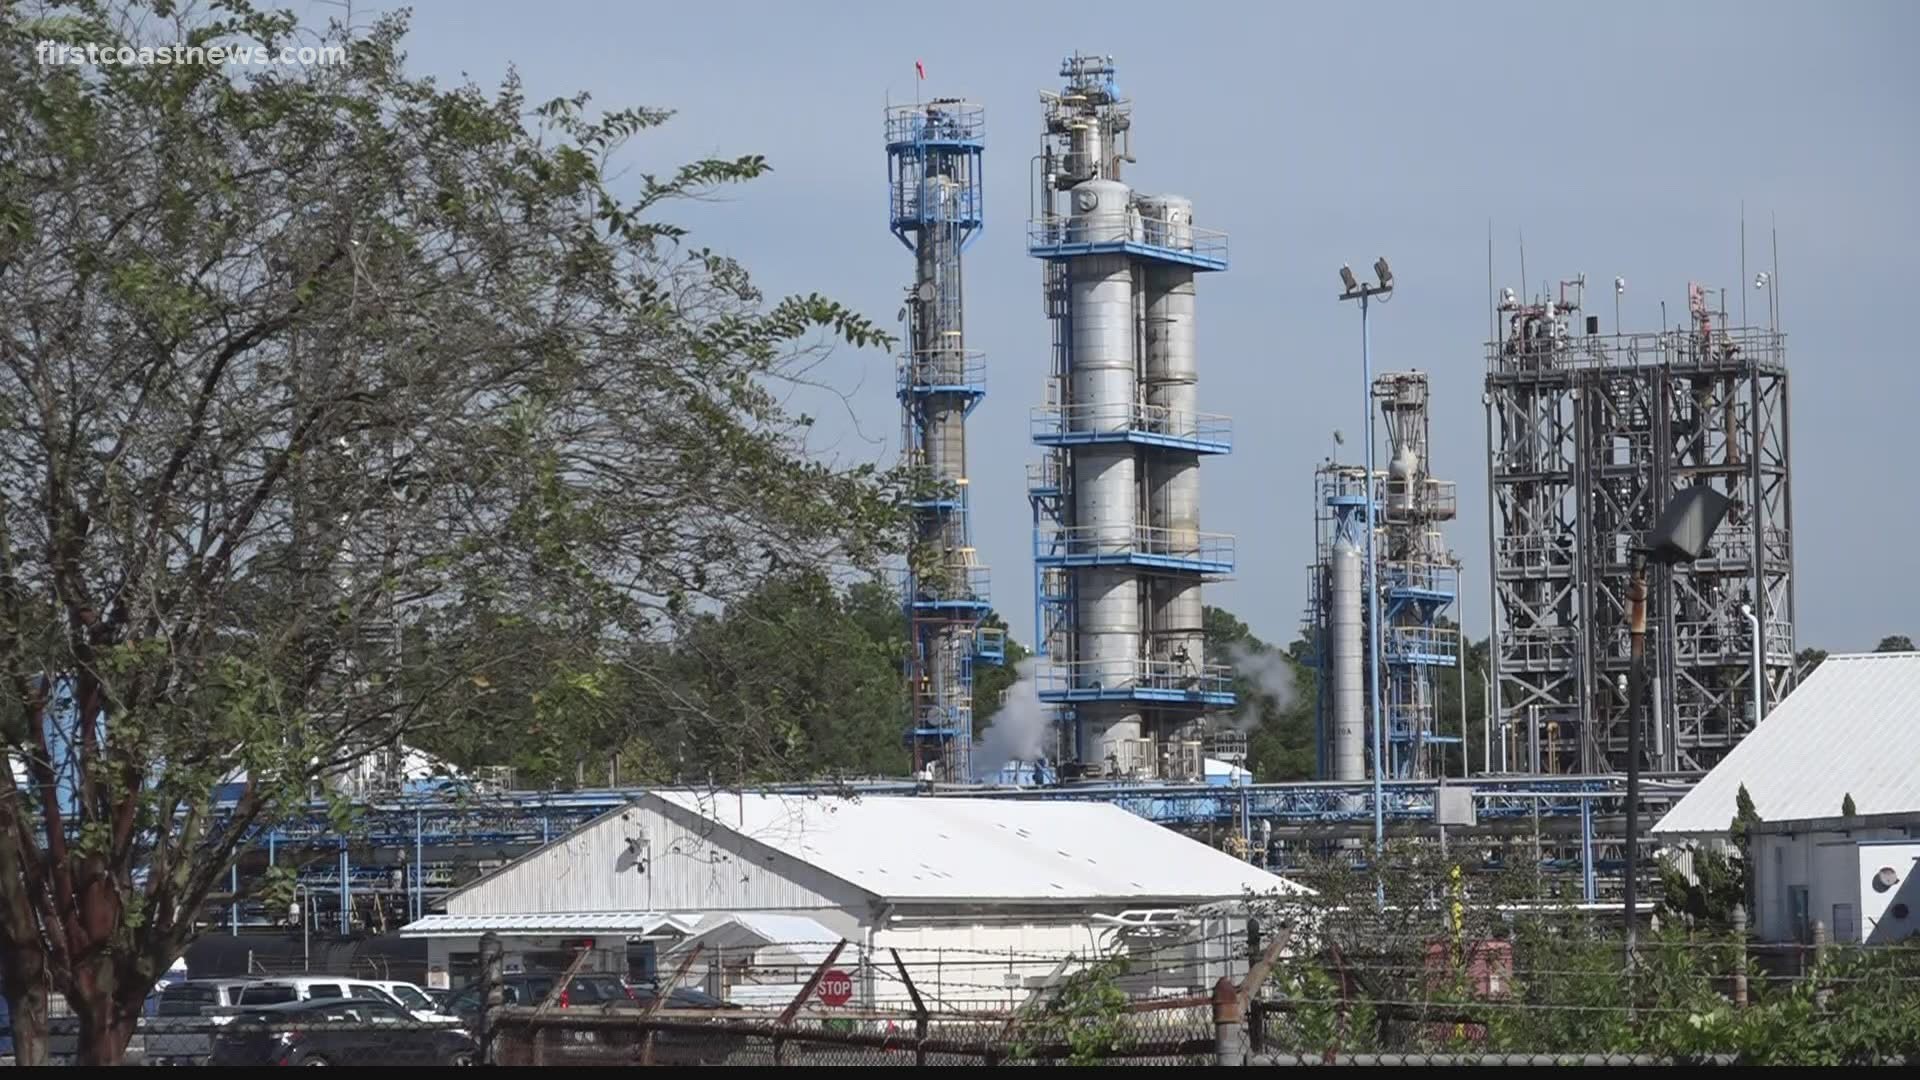 Last month First Coast News told you first about the city's investigation into the 'chemical-like' odor they believe could be coming from a fragrance plant.